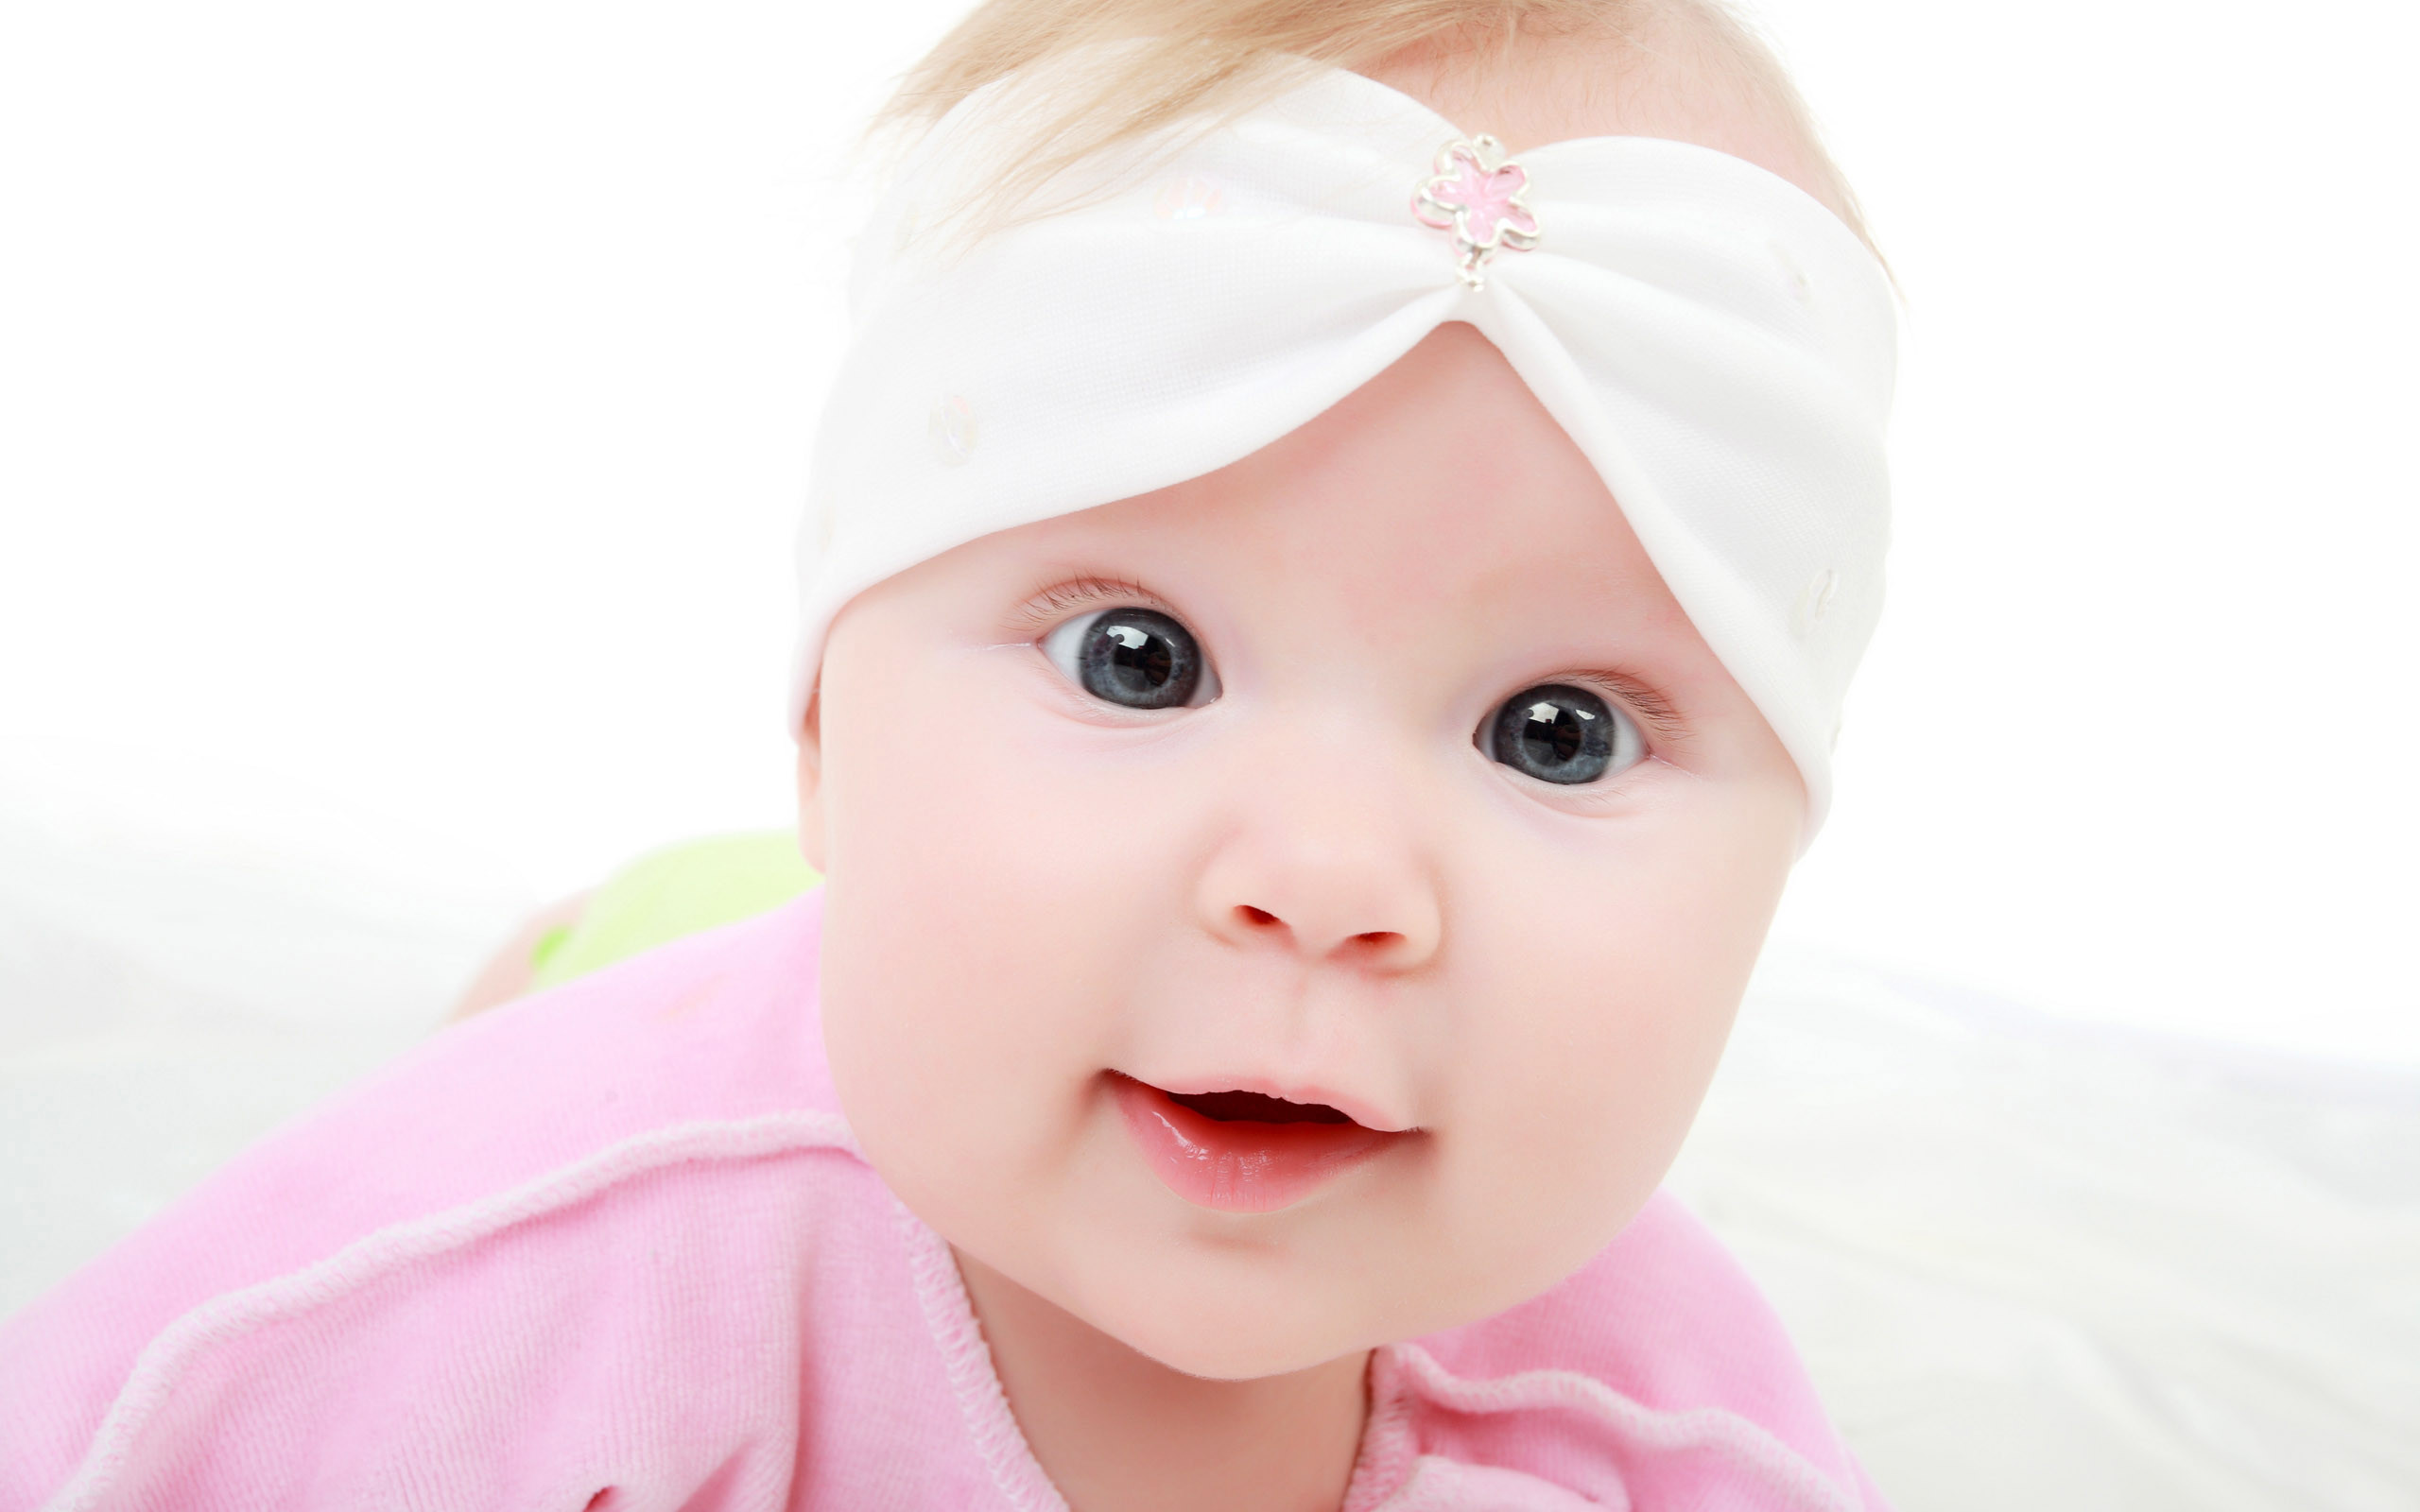 2560x1600 Smiling baby cute hd wallpapers